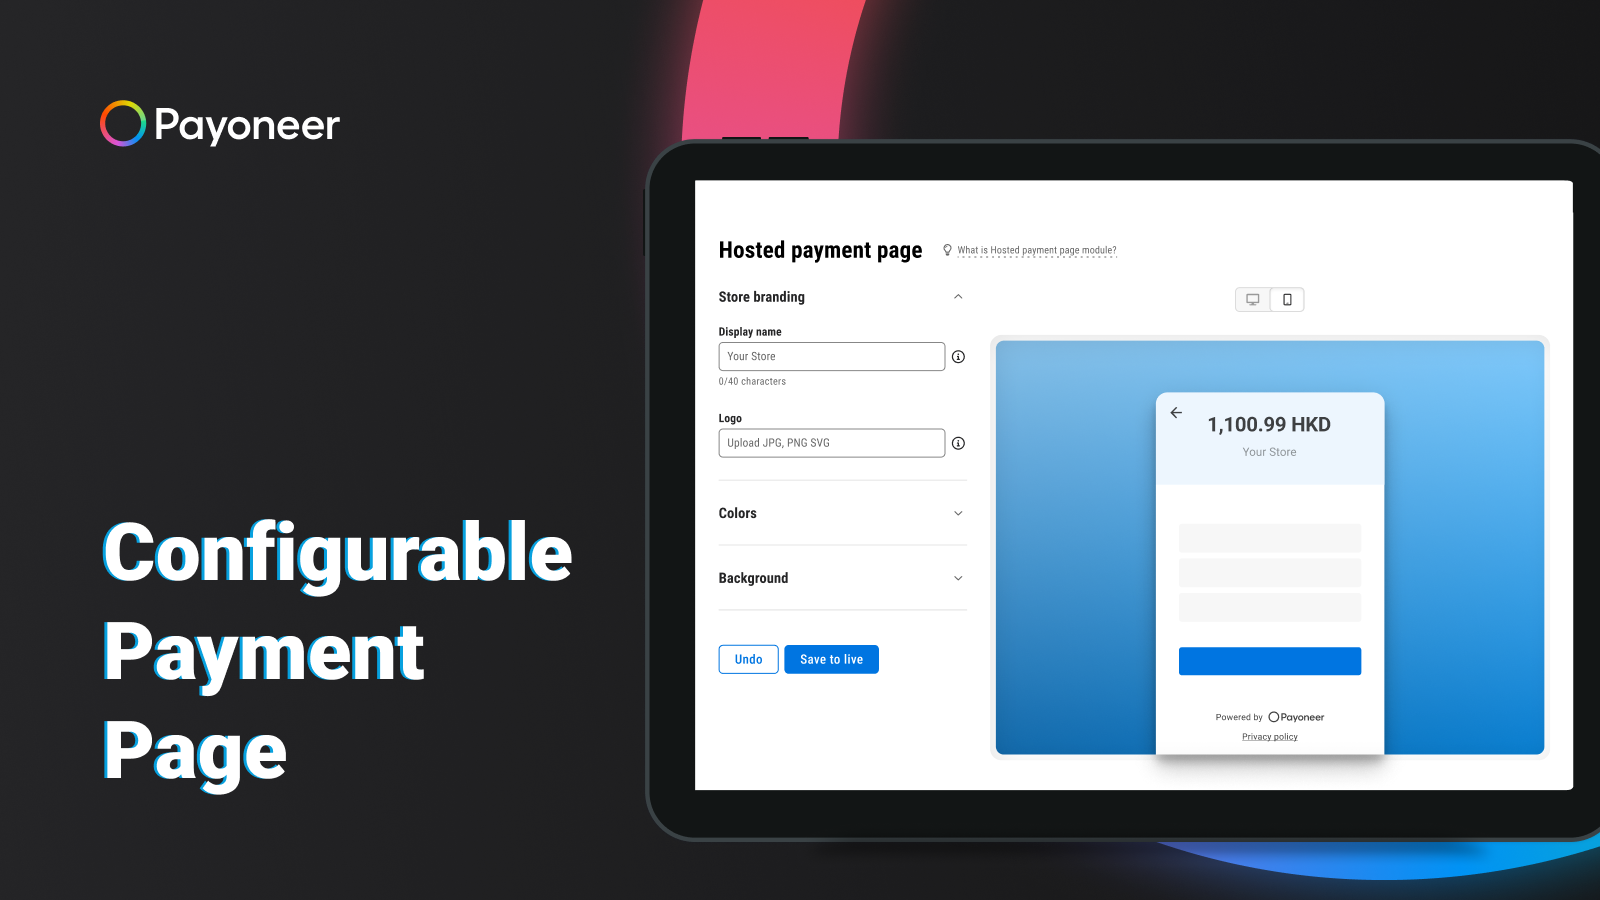 Configurable payment page